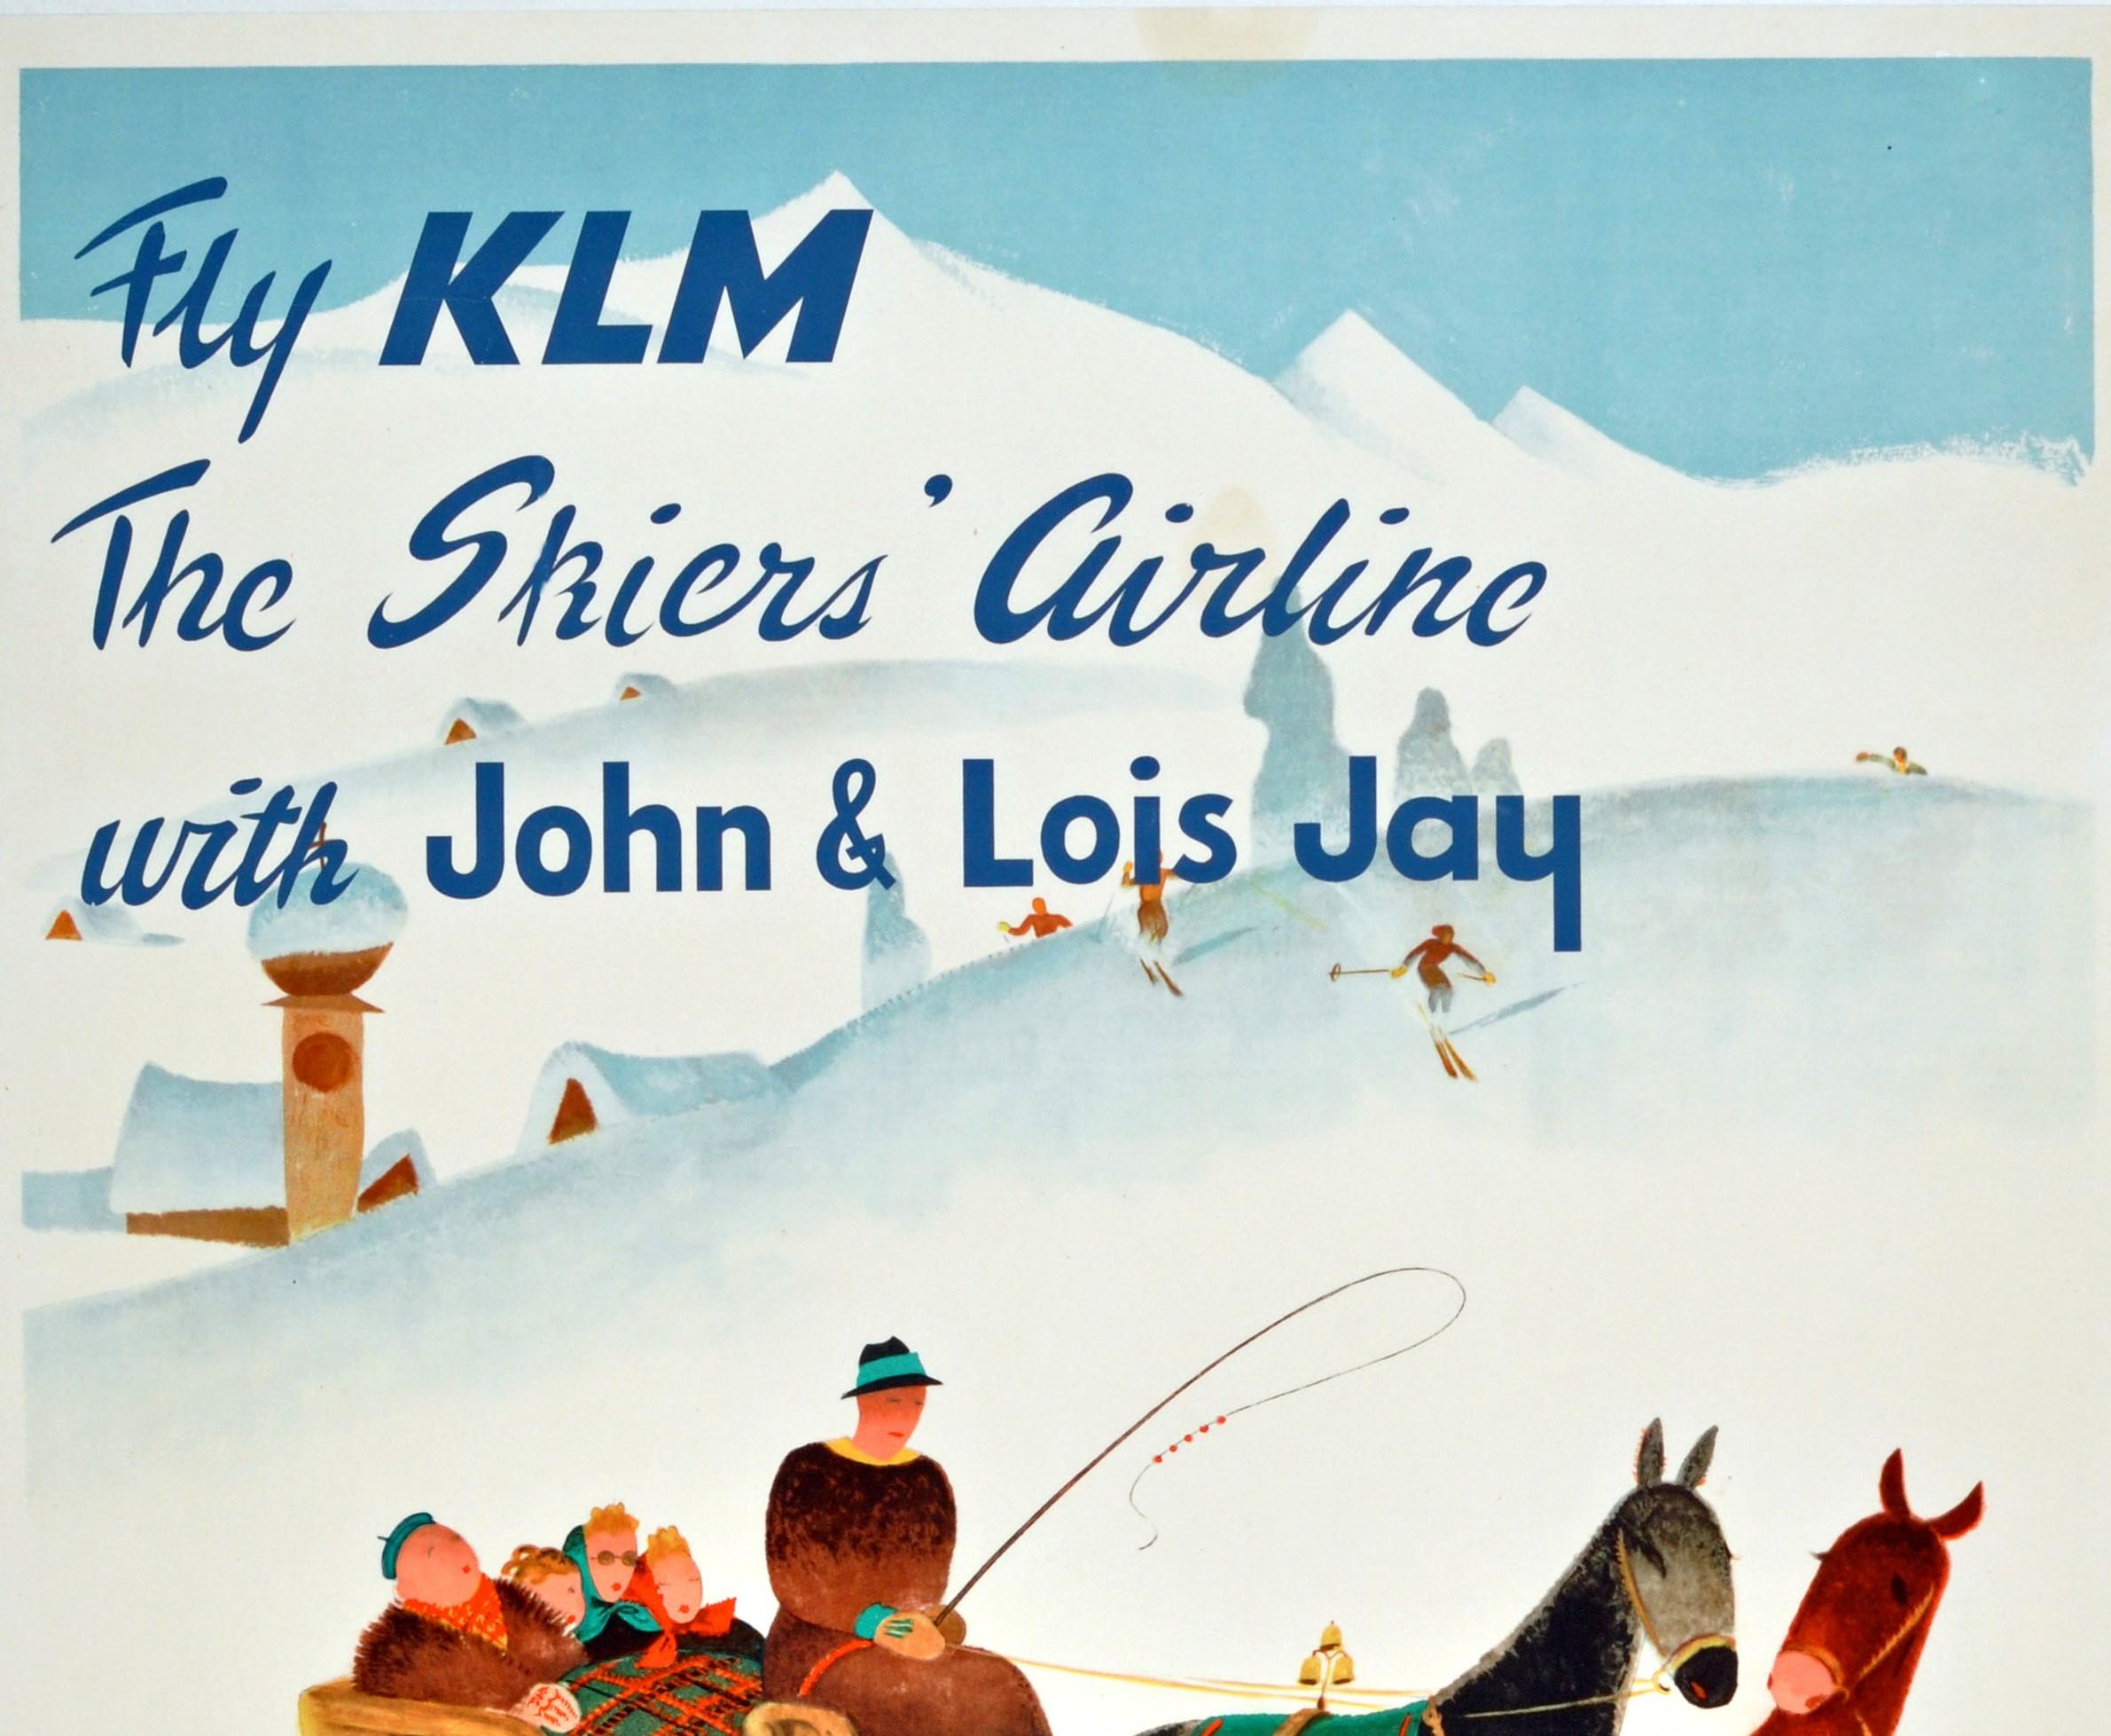 Original vintage travel poster for Austria / Autriche issued by KLM - Fly KLM The Skiers' Airline with John and Lois Jay - Sun, Snow and Fun in Austria. Great image of a snowy scene by the Austrian artist Hermann Kosel (1896-1983) featuring people